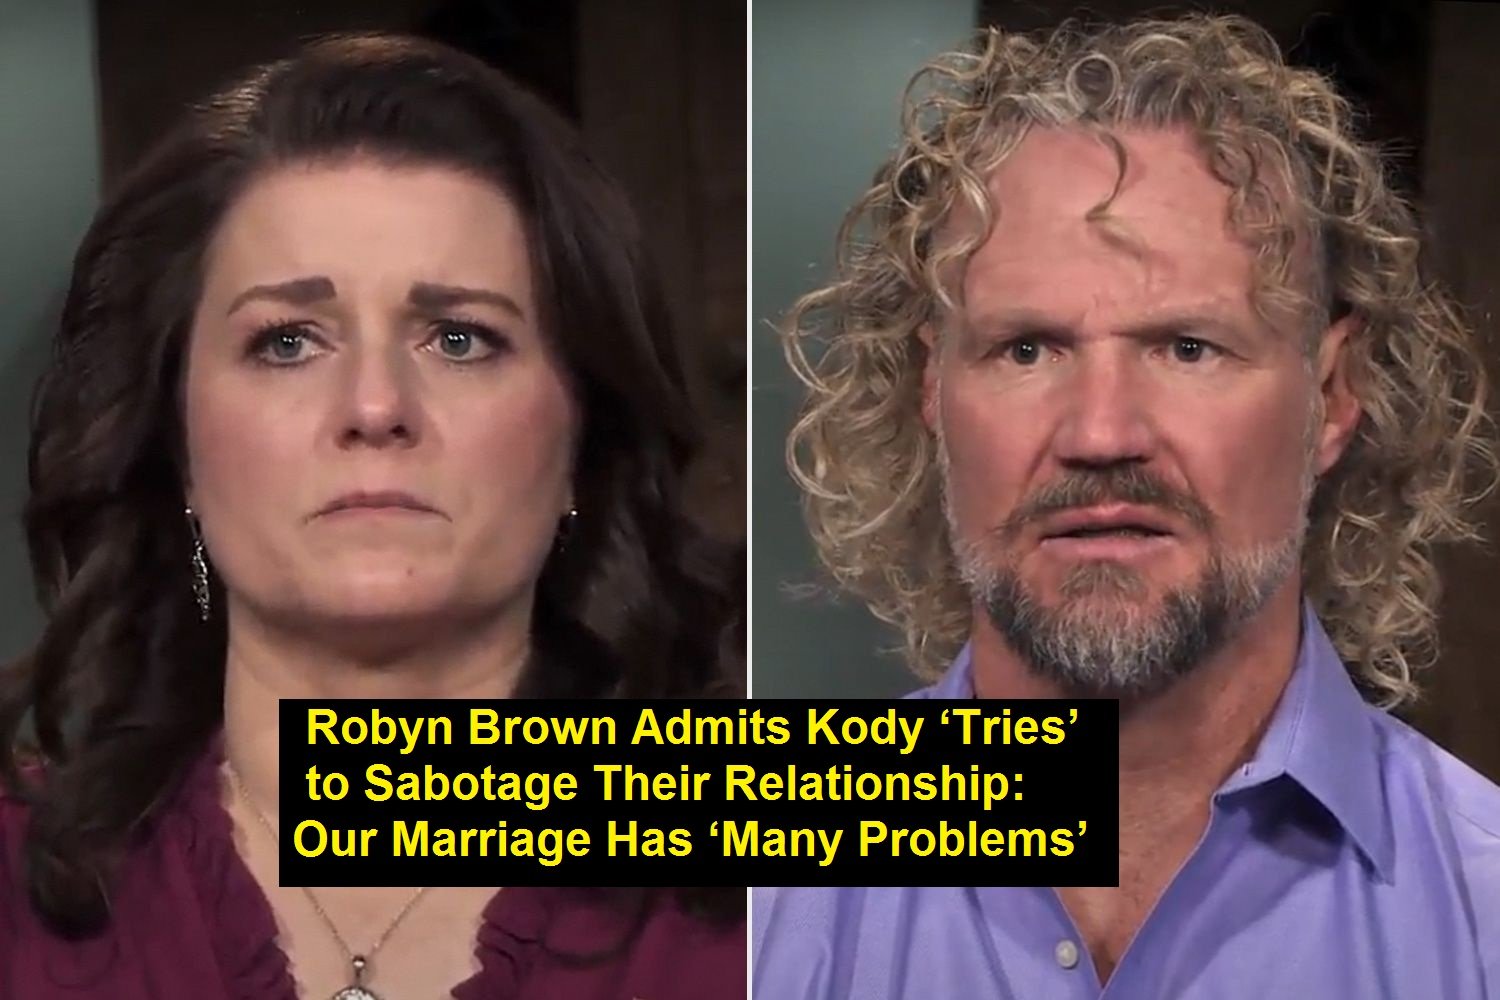 ‘Sister Wives’ Stars Kody & Robyn Have an ‘Agreement’ to ‘Free Each Other’ if They Aren’t in Love